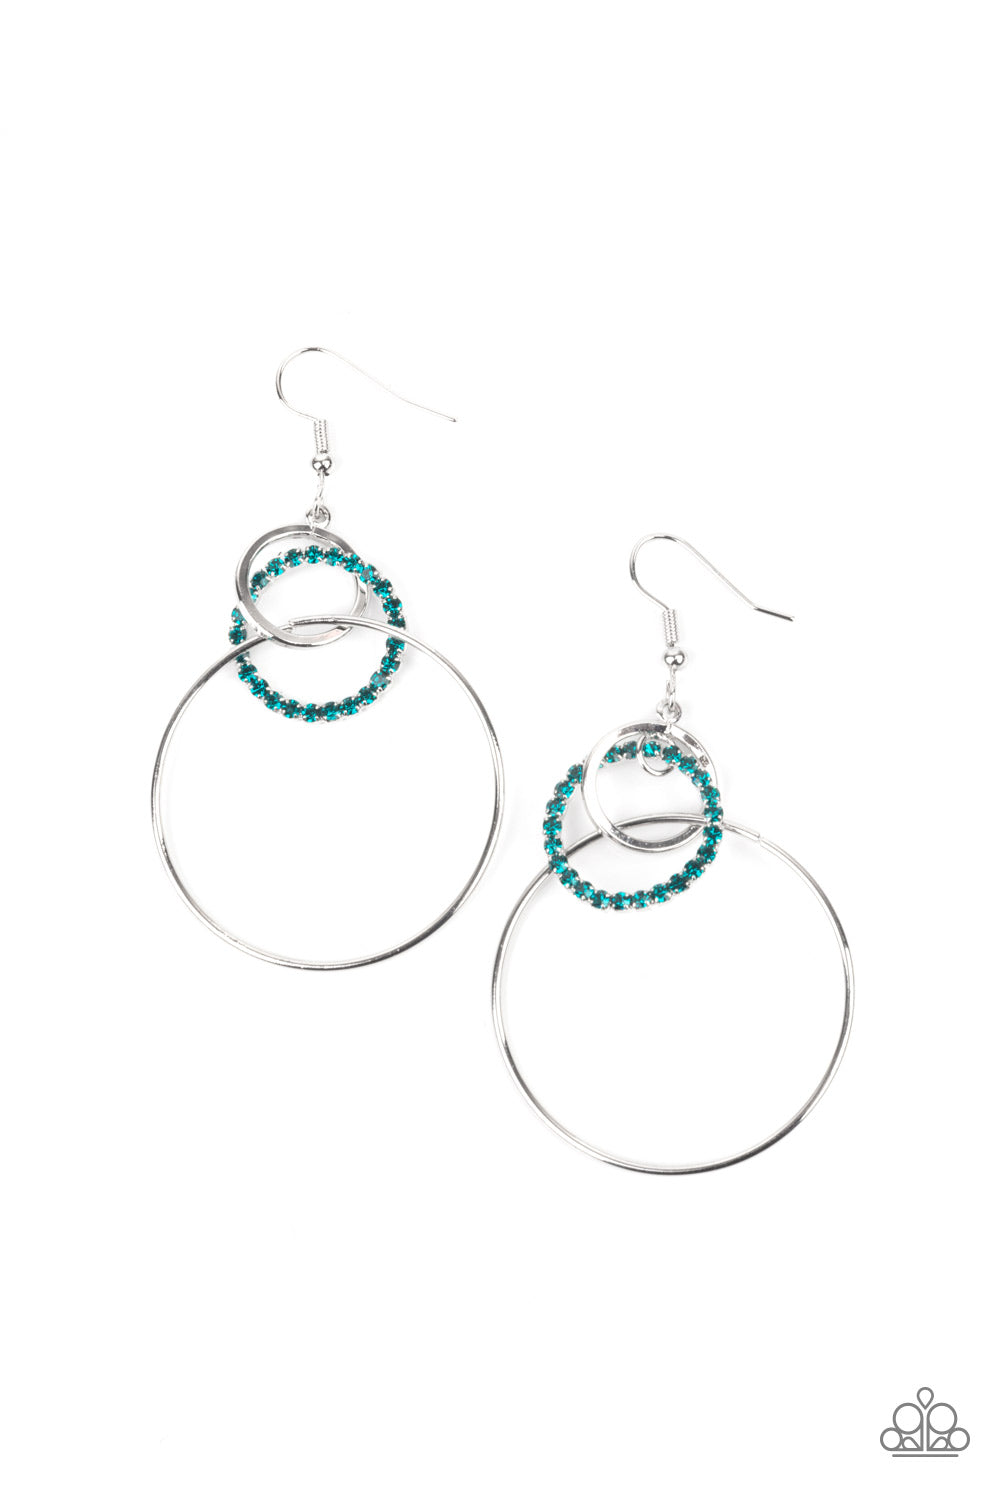 Paparazzi In An Orderly Fashion - Blue Earrings - A Finishing Touch Jewelry